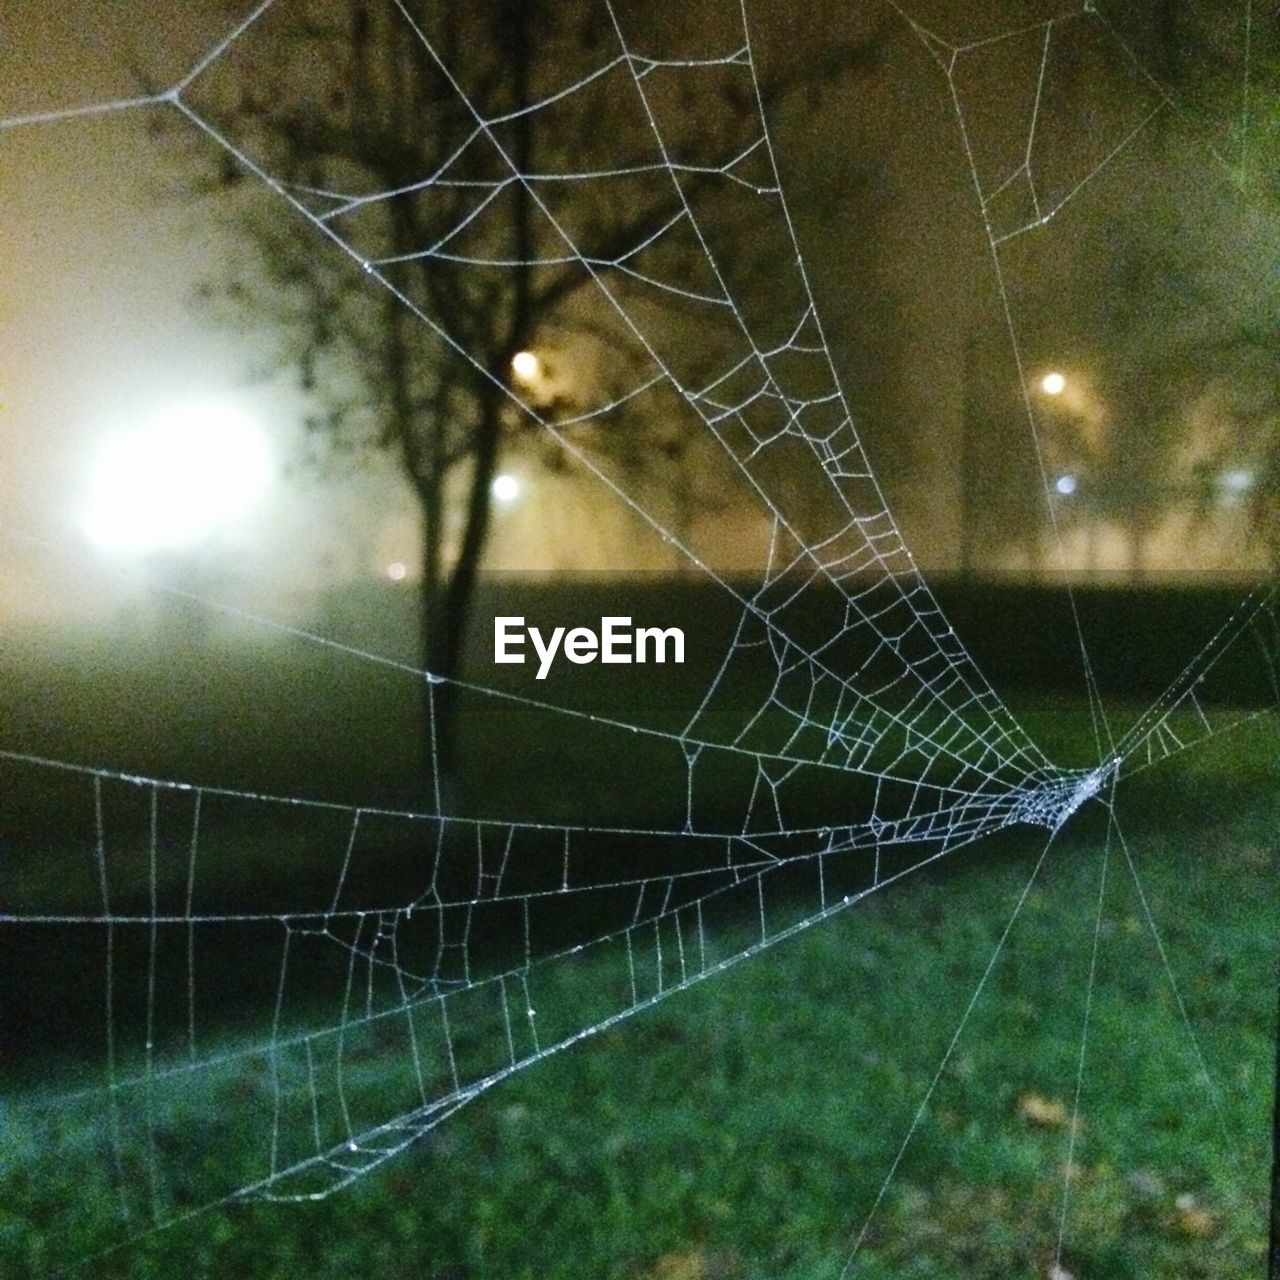 CLOSE-UP OF SPIDER AND WEB AGAINST BLURRED BACKGROUND